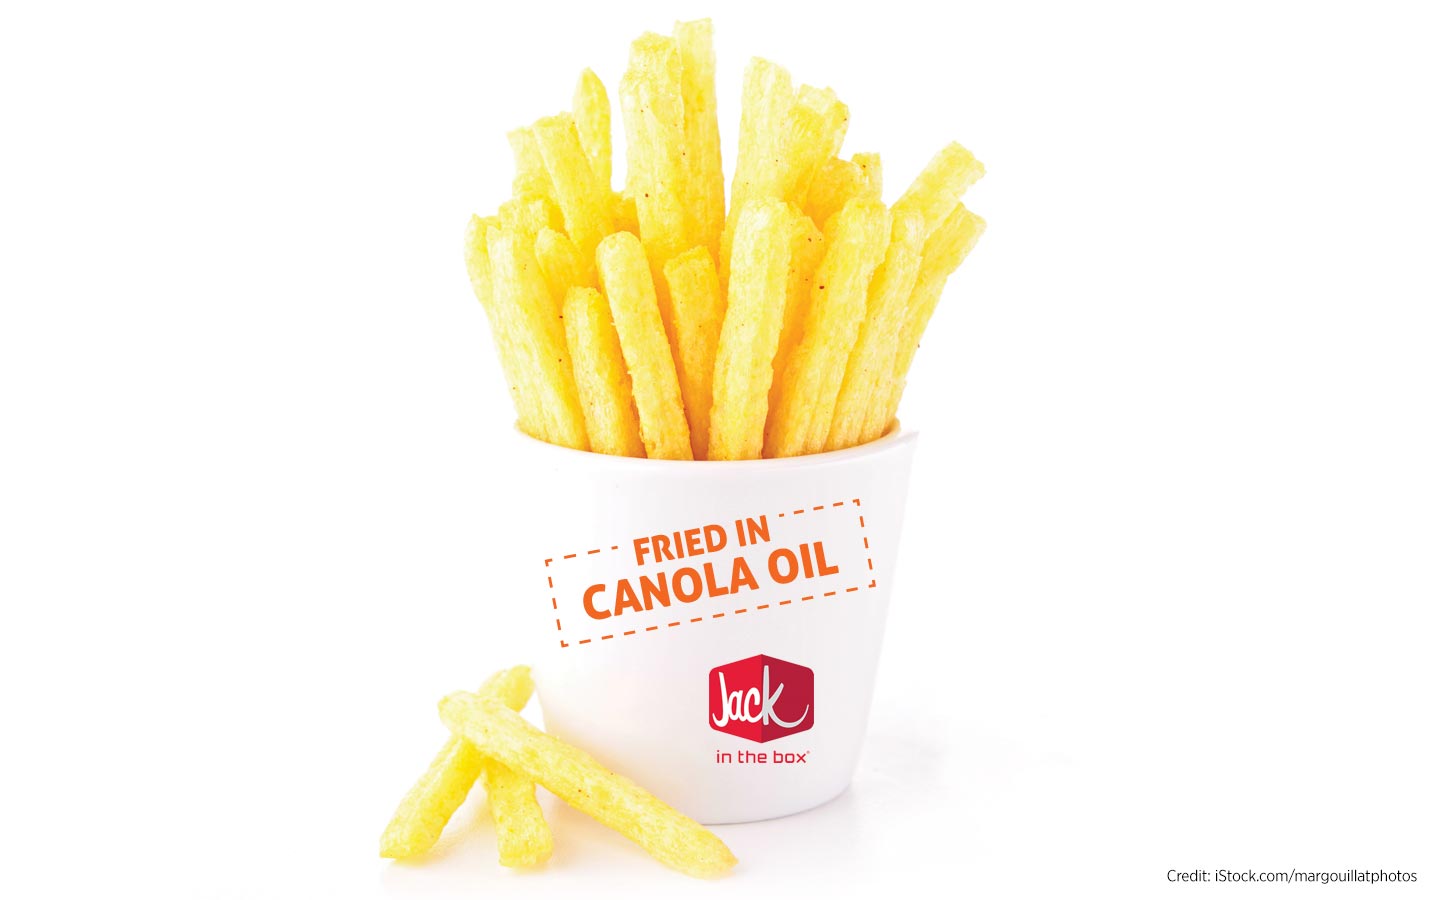 A container of Jack in the Box fries, with the label "Fried in Canola Oil"